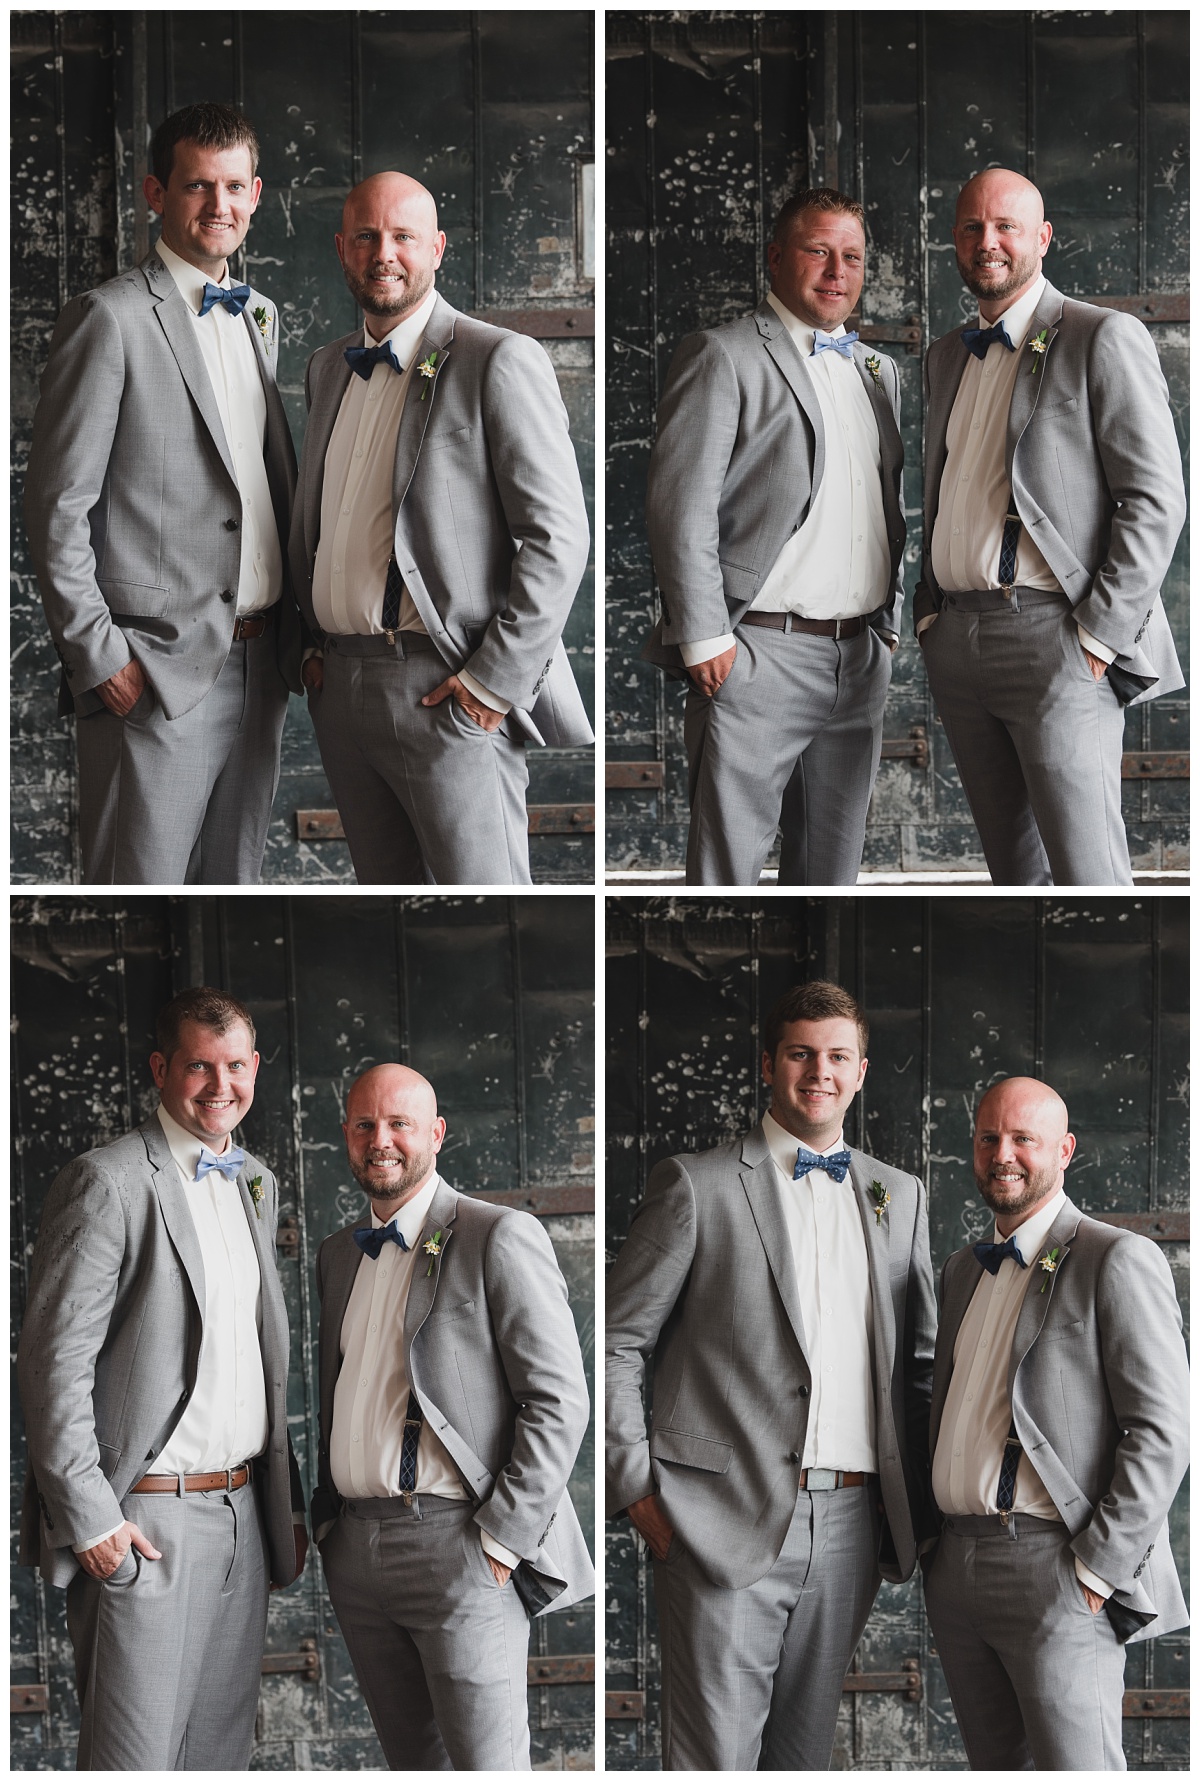 Series of 4 images of the groom with each groomsman, each wearing a grey suit, white shirt and blue bow ties.